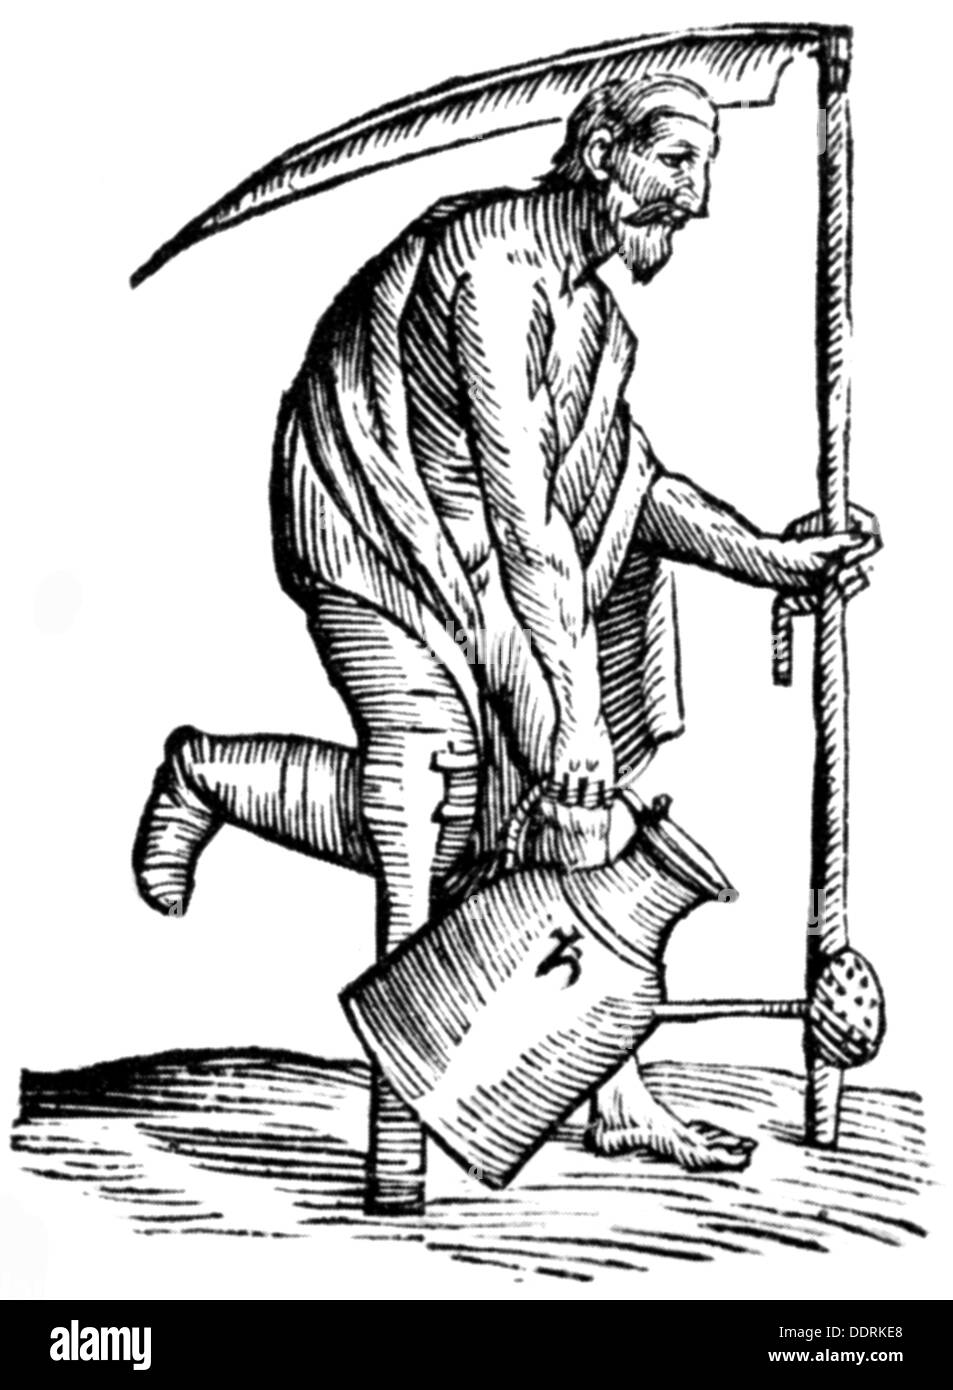 metal, lead, allegory as an old man with scythe and stump foot, woodcut, 16th century, 16th century, graphic, graphics, impersonation, impersonations, half length, standing, holding, hold, scythe, scythes, watering can, watering pot, watering cans, jug, jugs, stilt, stilts, wooden leg, peg leg, wooden legs, peg legs, artificial leg, artificial legs, prosthesis, prostheses, metal, metals, native lead, woodcut, woodcuts, historic, historical, man, men, male, people, Additional-Rights-Clearences-Not Available Stock Photo